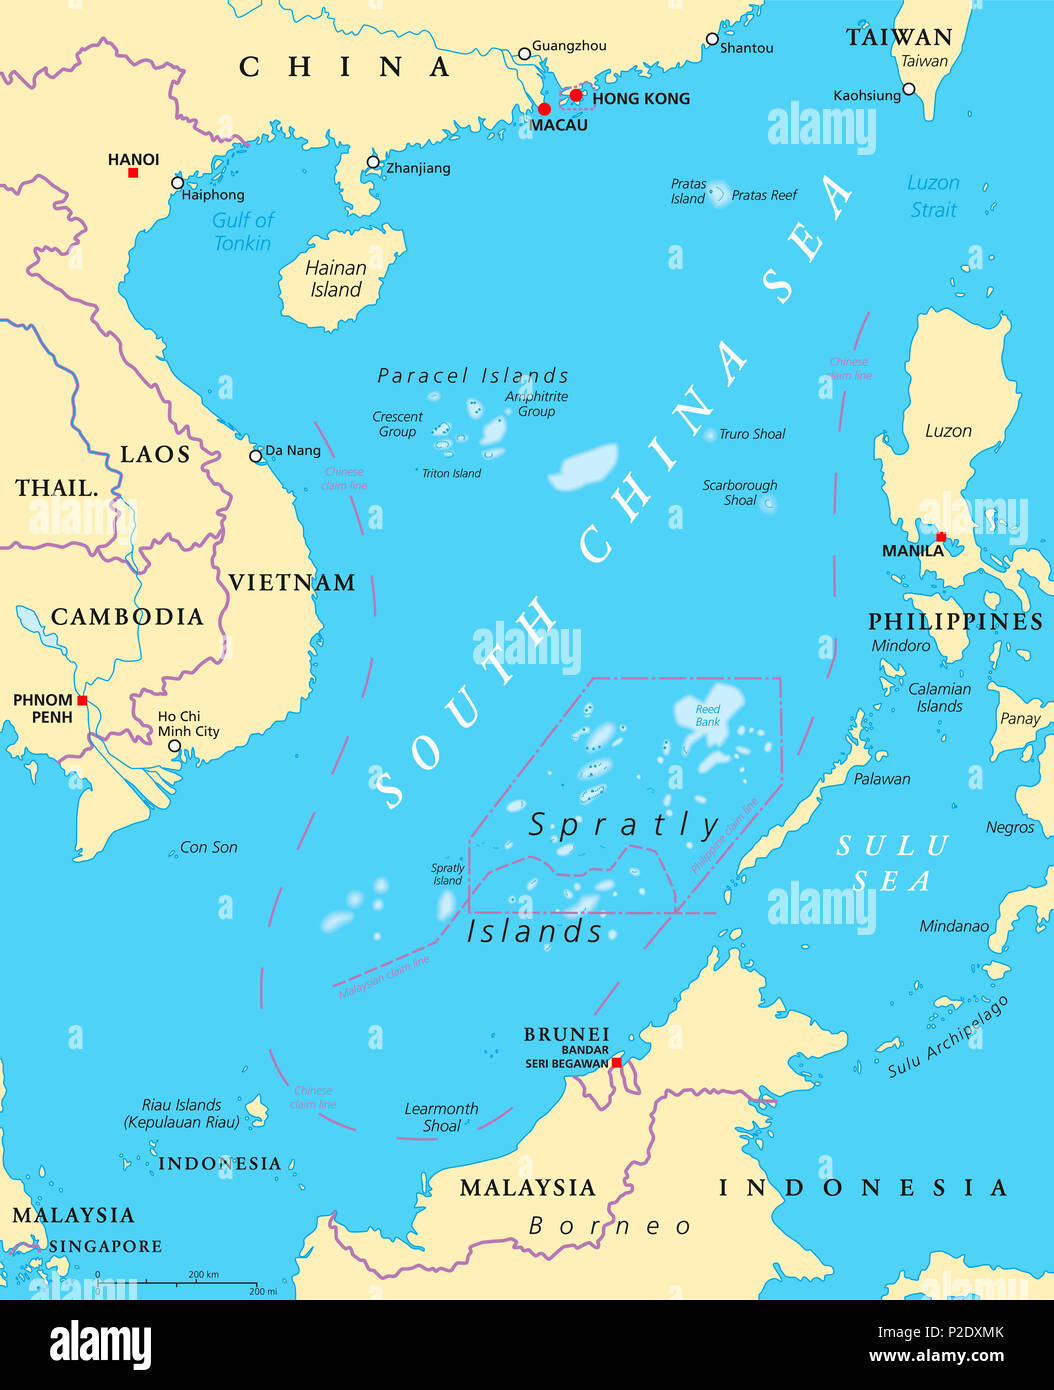 South China Sea Islands, political map. Paracel Islands and Spratly Islands. Partially claimed by China and other neighboring states. Illustration. Stock Photo